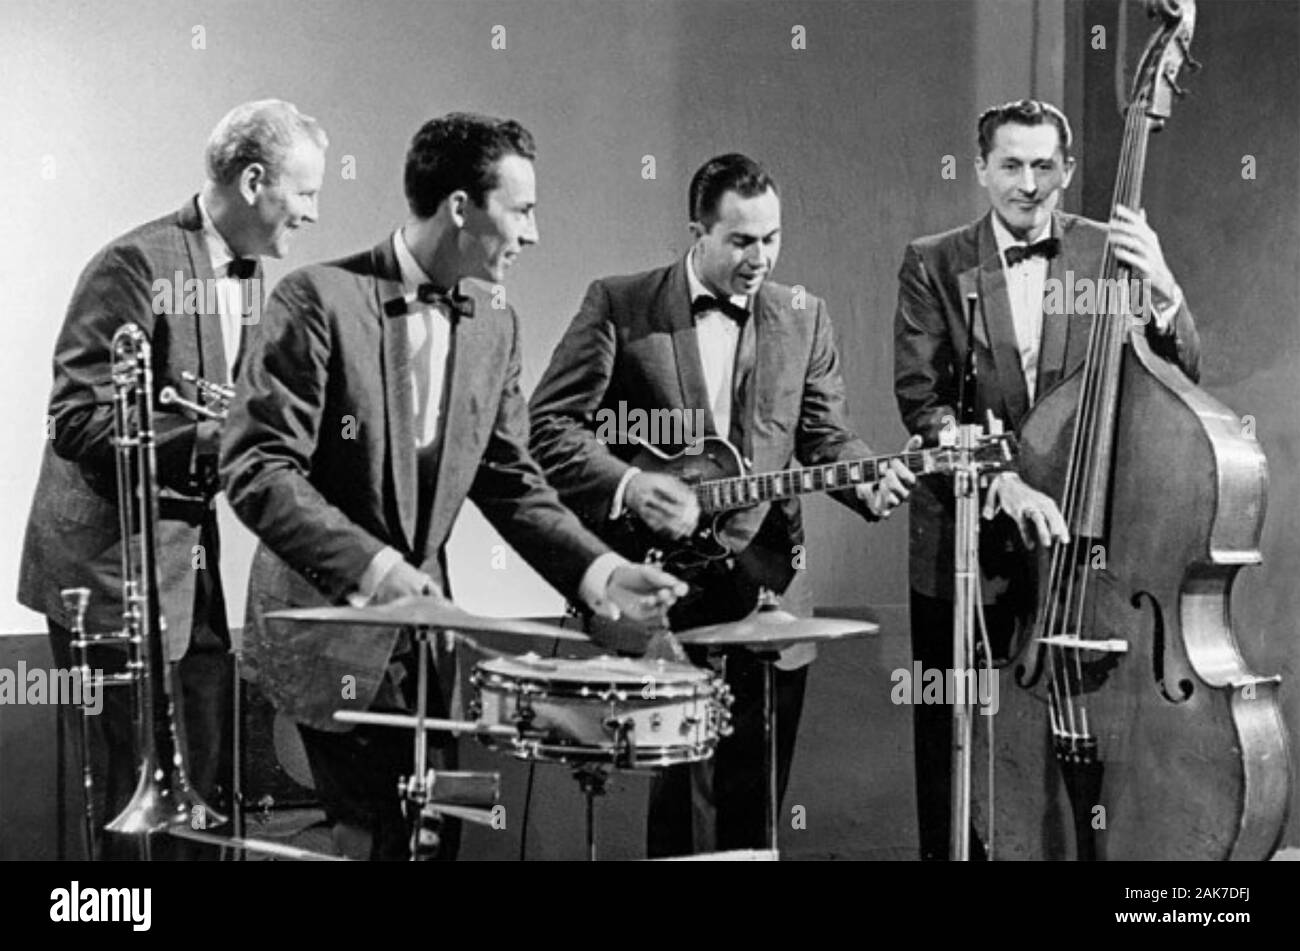 THE FOUR FRESHMEN Promotional photo of American group about 1955. From  left: Ken Albers, Ros Barbour, Don Barbour, Bob Flanigan Stock Photo - Alamy